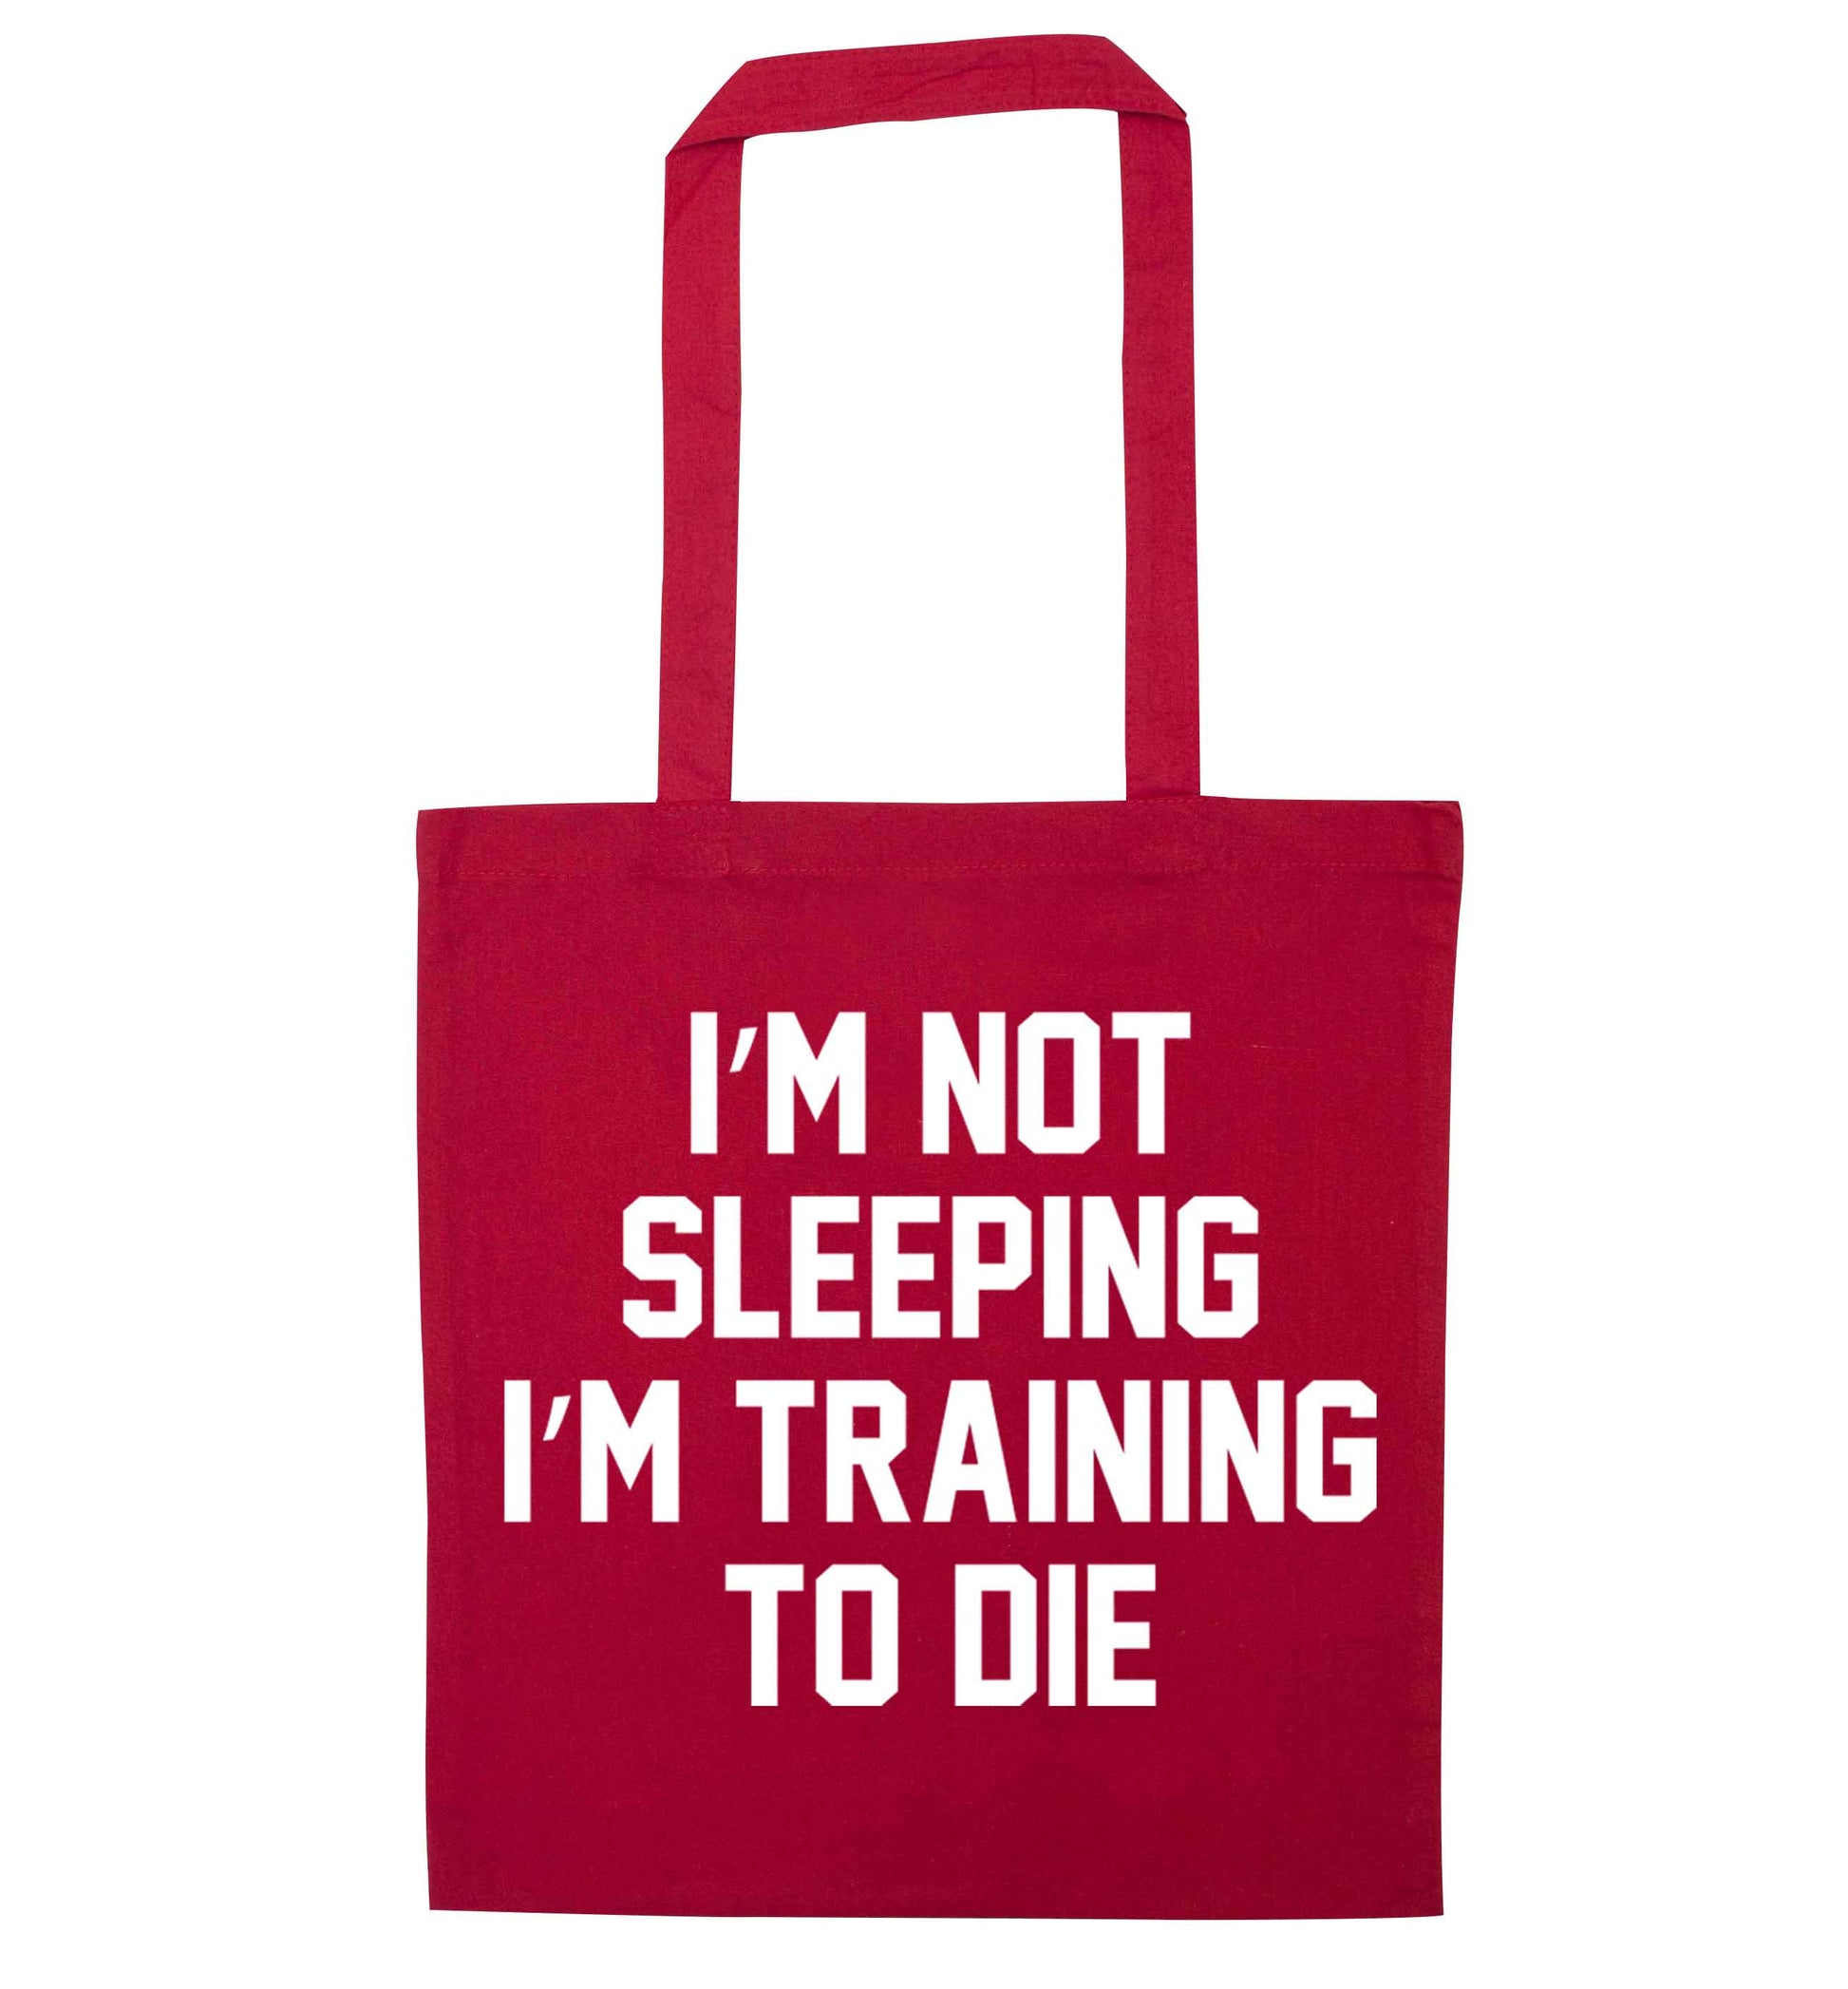 I'm not sleeping I'm training to die red tote bag